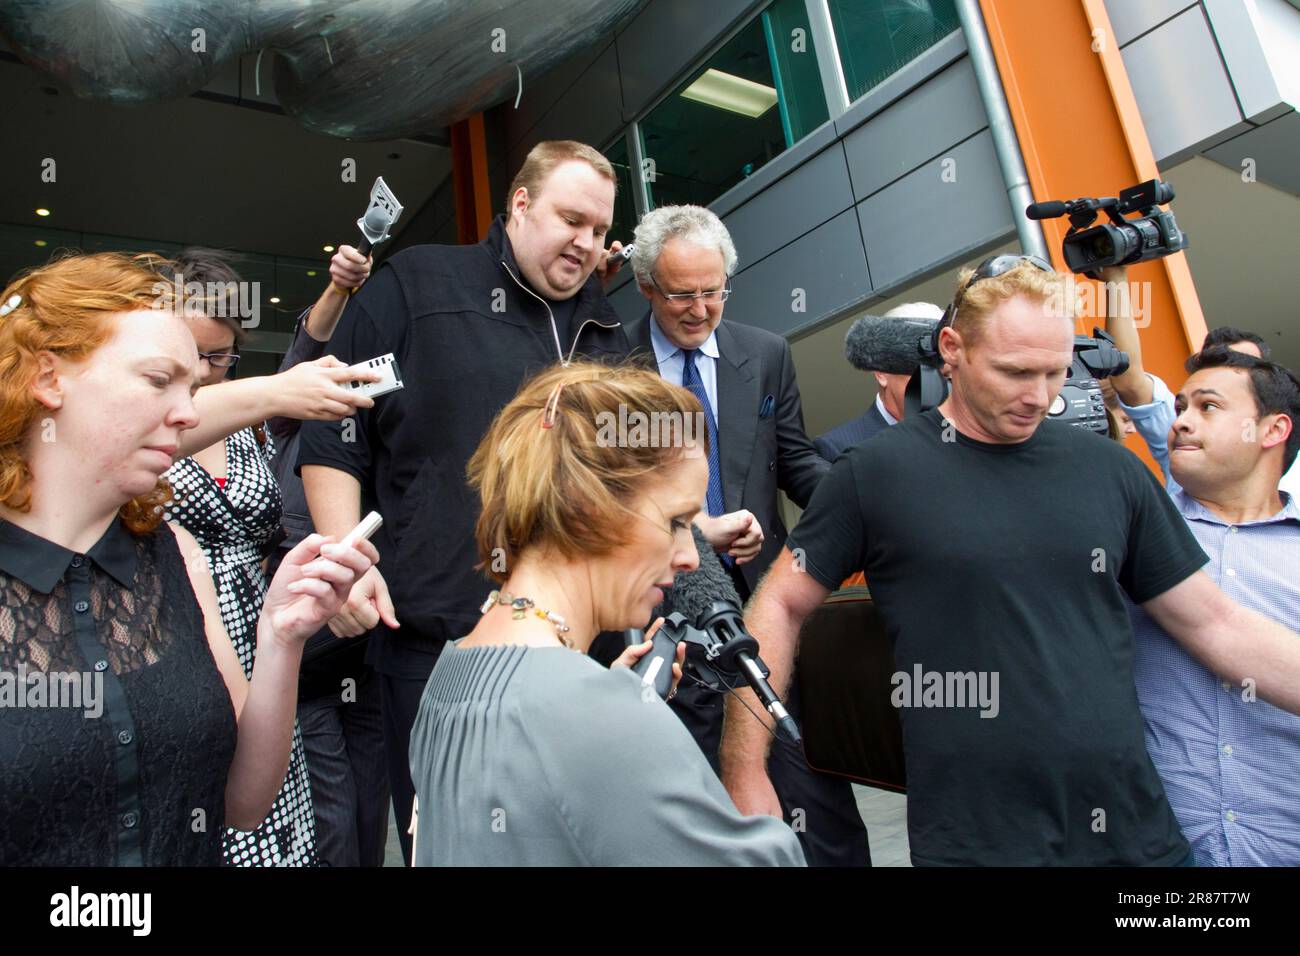 Kim Dotcom (aka Kim Schmitz), centre top, accompanied by lawyer Willy Akel, is released on bail at the District Court  on charges in a US led copyright infringement Investigation, North Shore, Auckland, New Zealand, Wednesday, February 22, 2012. Stock Photo